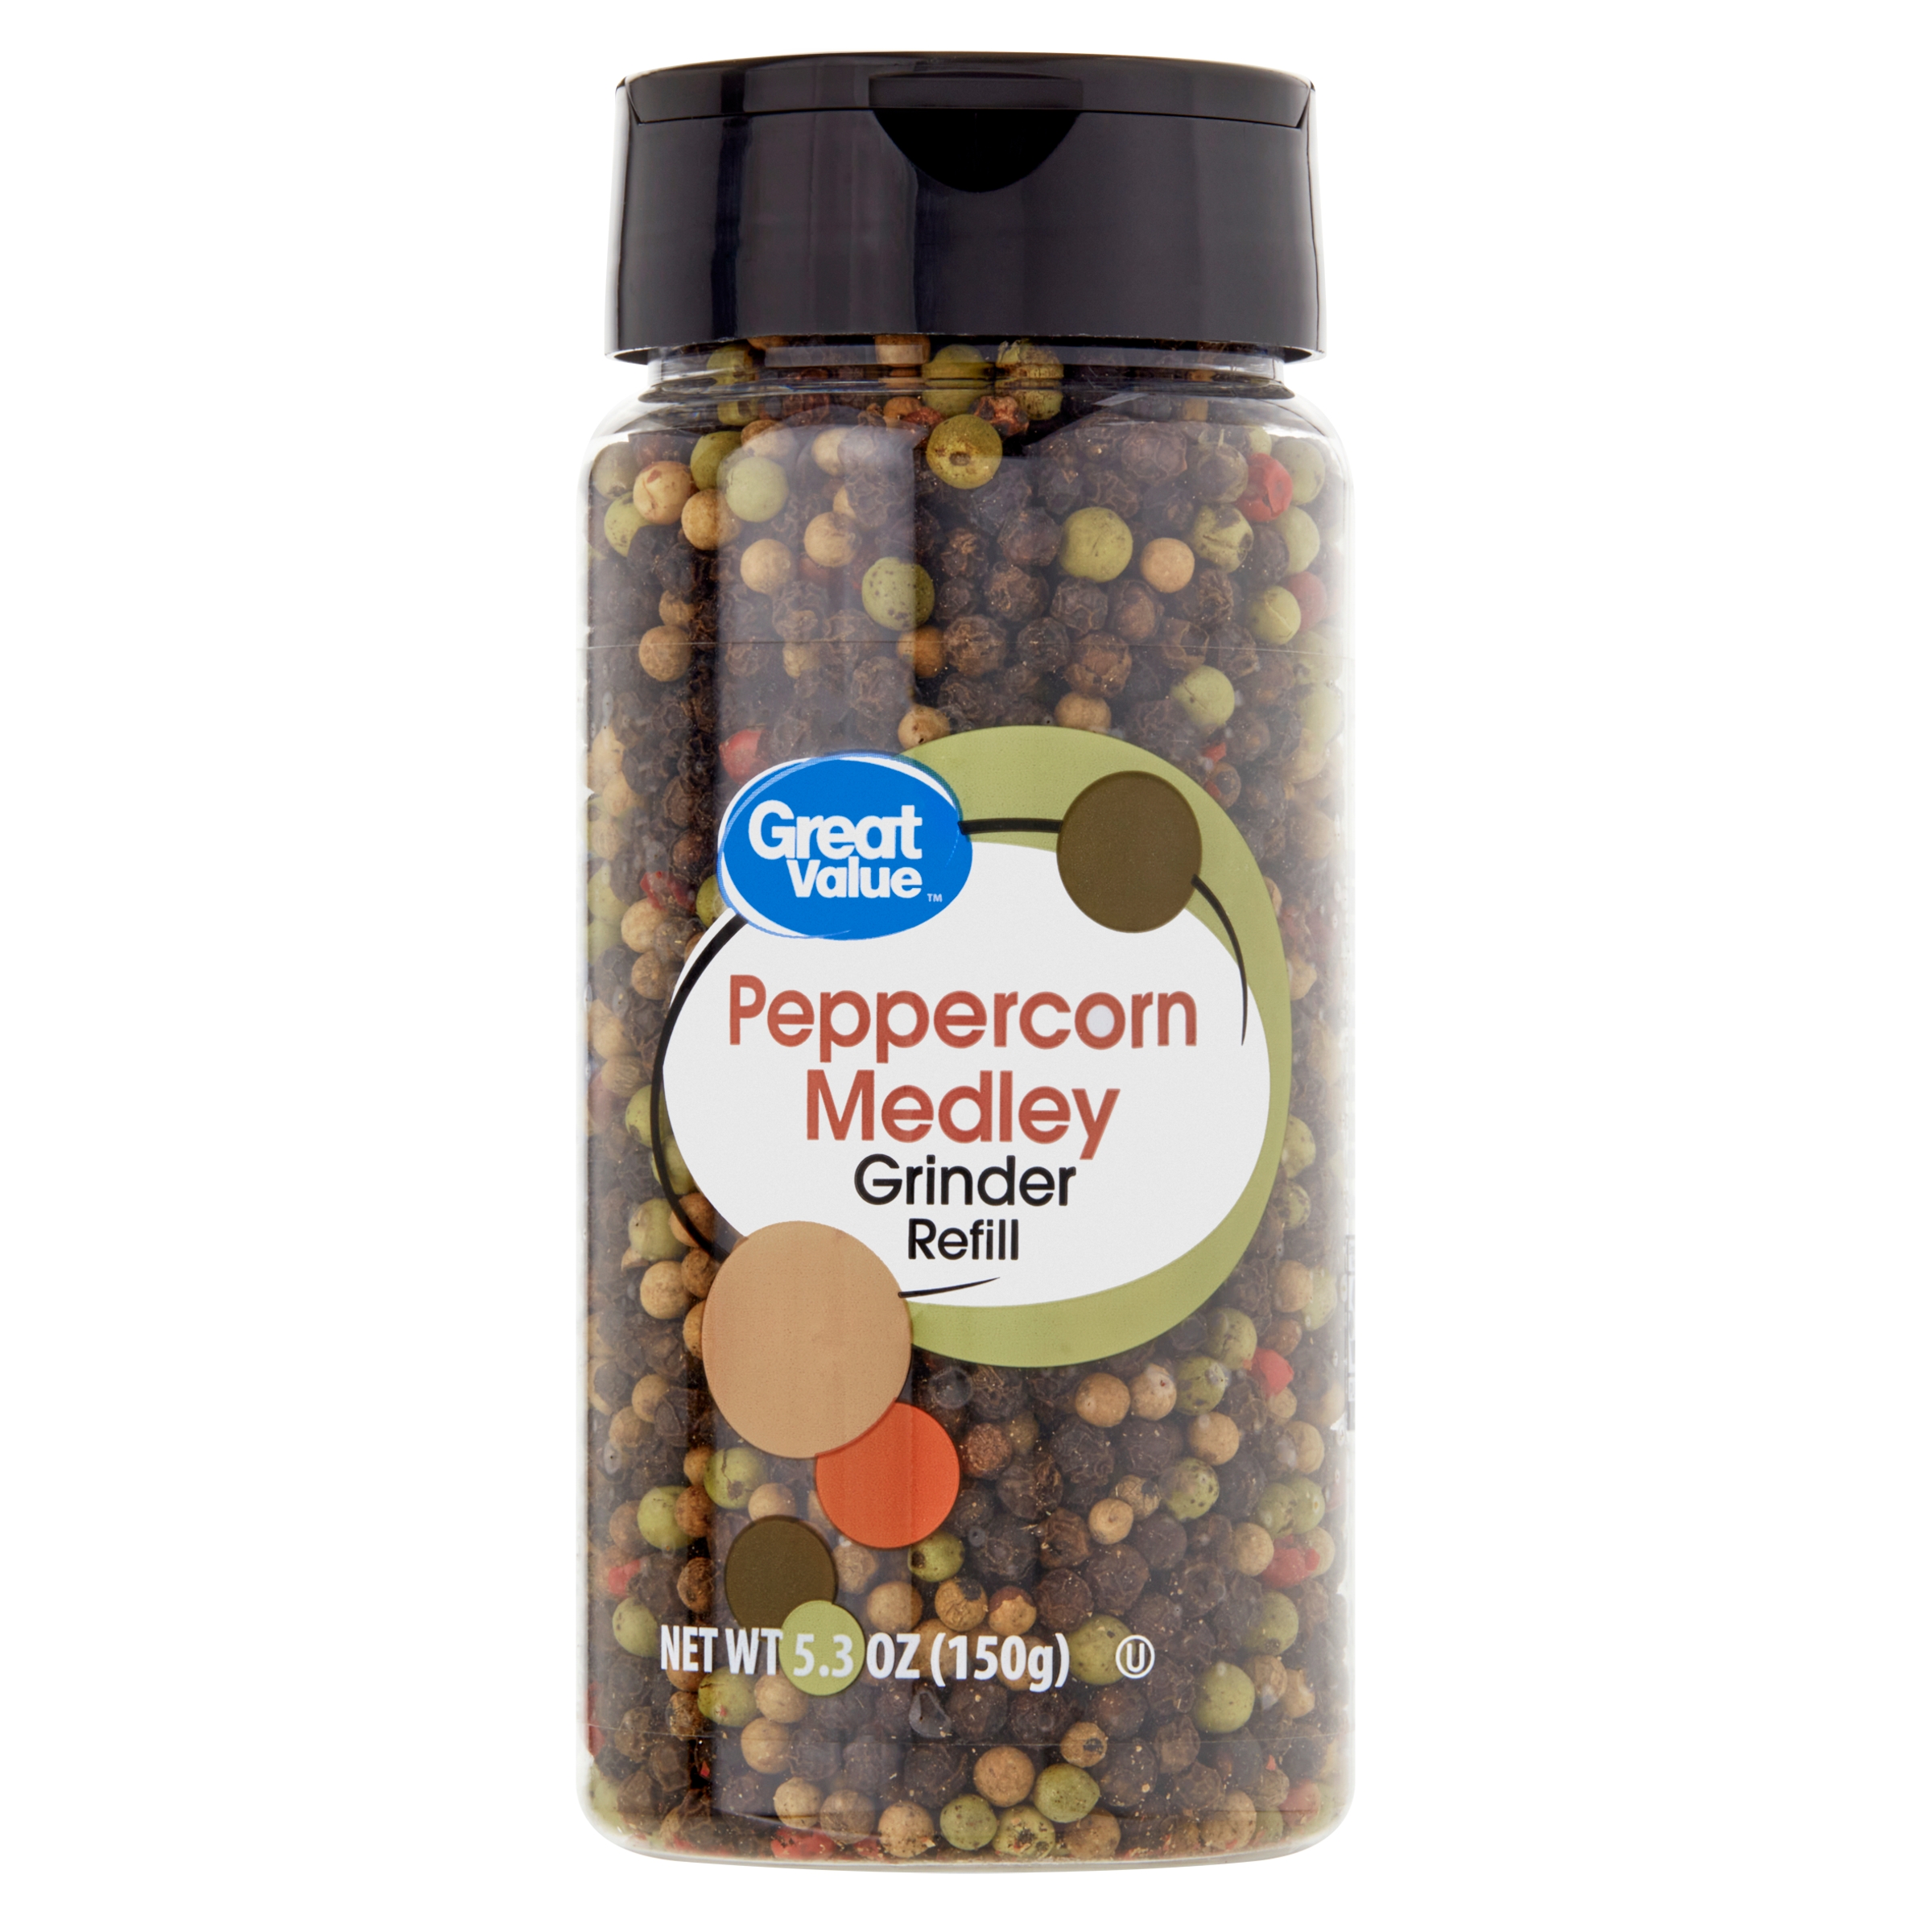 Great Value Peppercorn Medley Grinder Refill, 5.3 oz - image 1 of 7